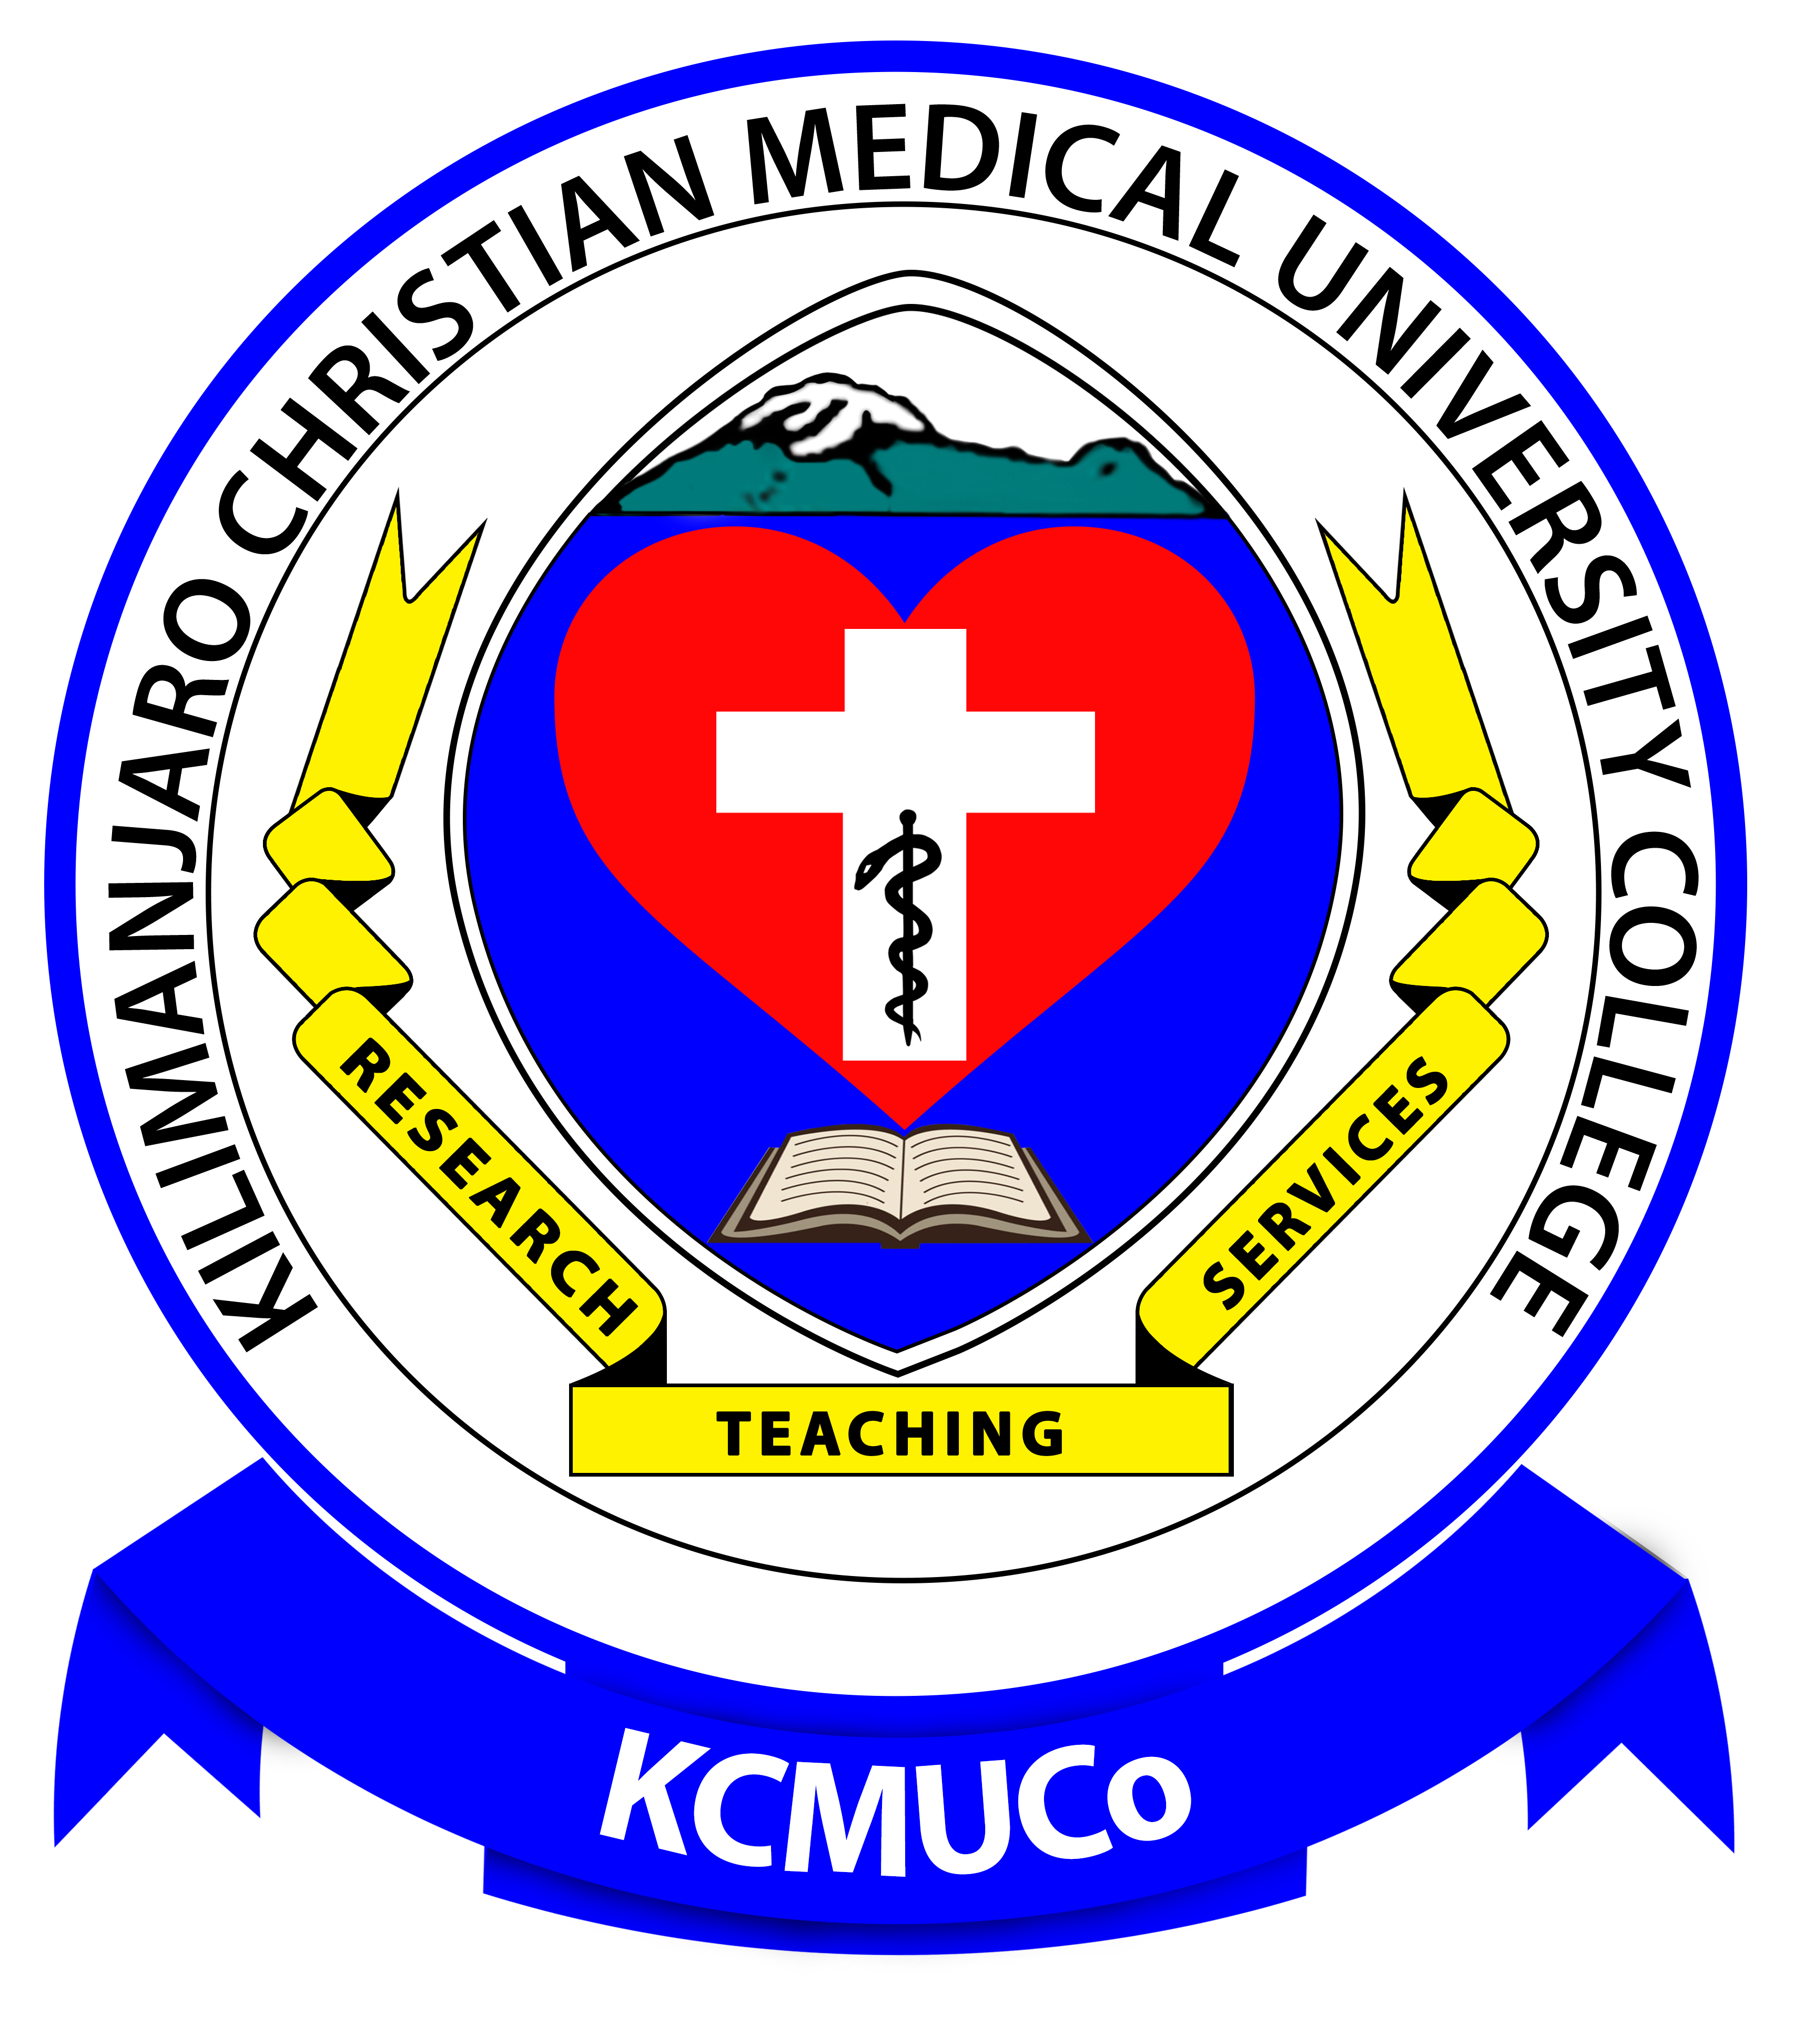 KCMUCo-LEARNING MANAGEMENT SYSTEM